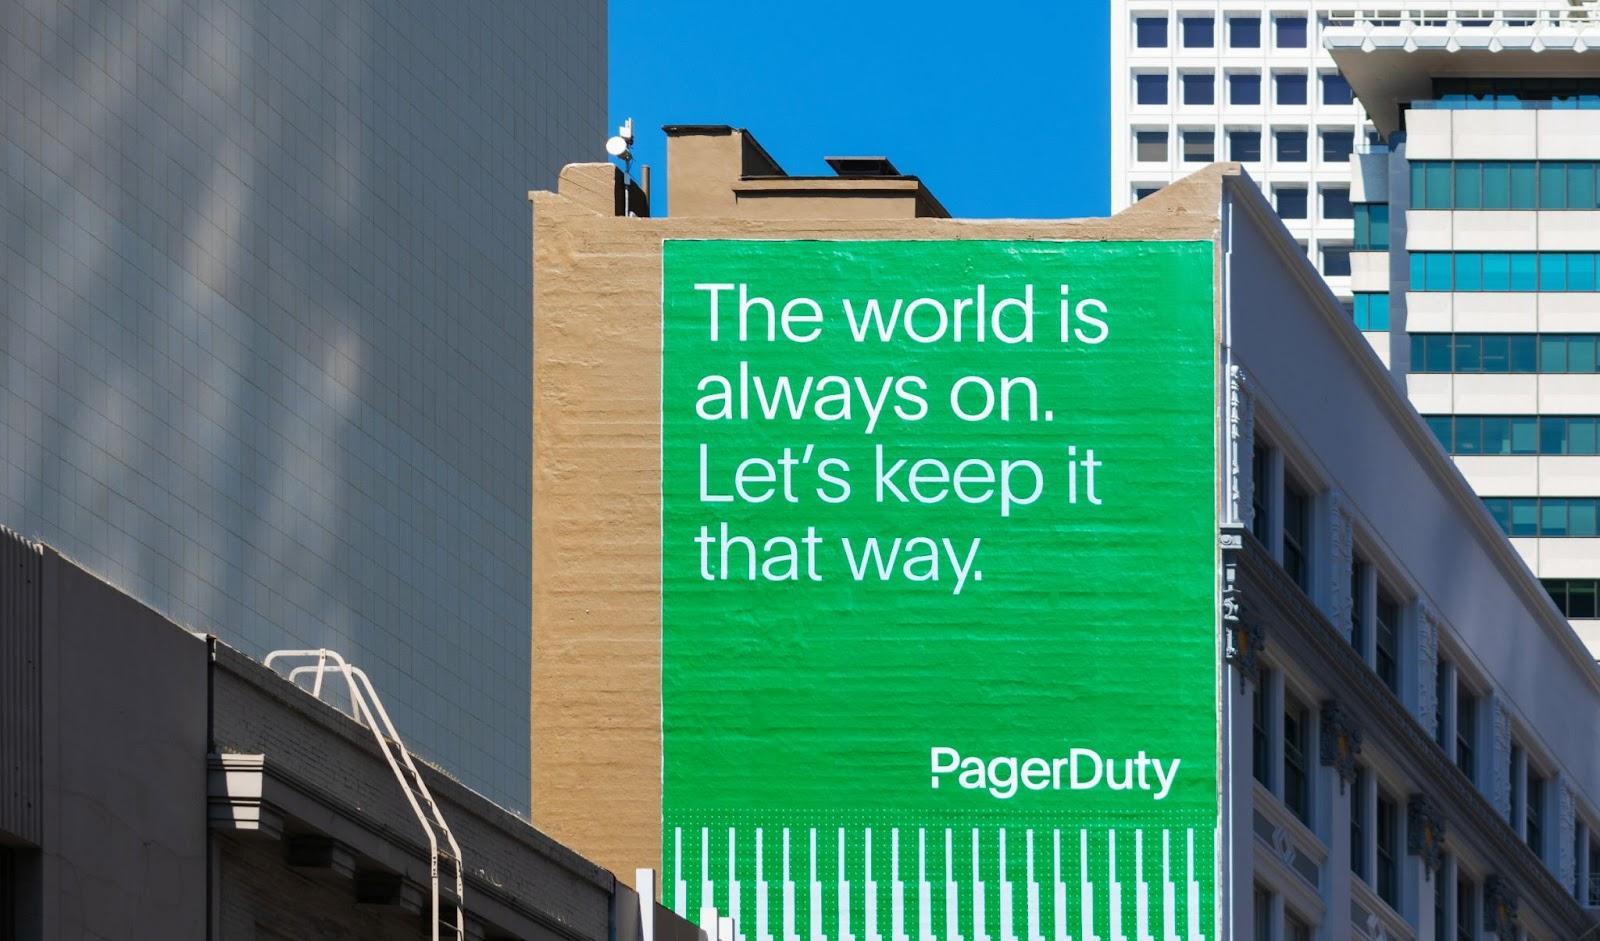 How PagerDuty Applies DevOps Best Practices to Achieve More Reliable Data at Scale